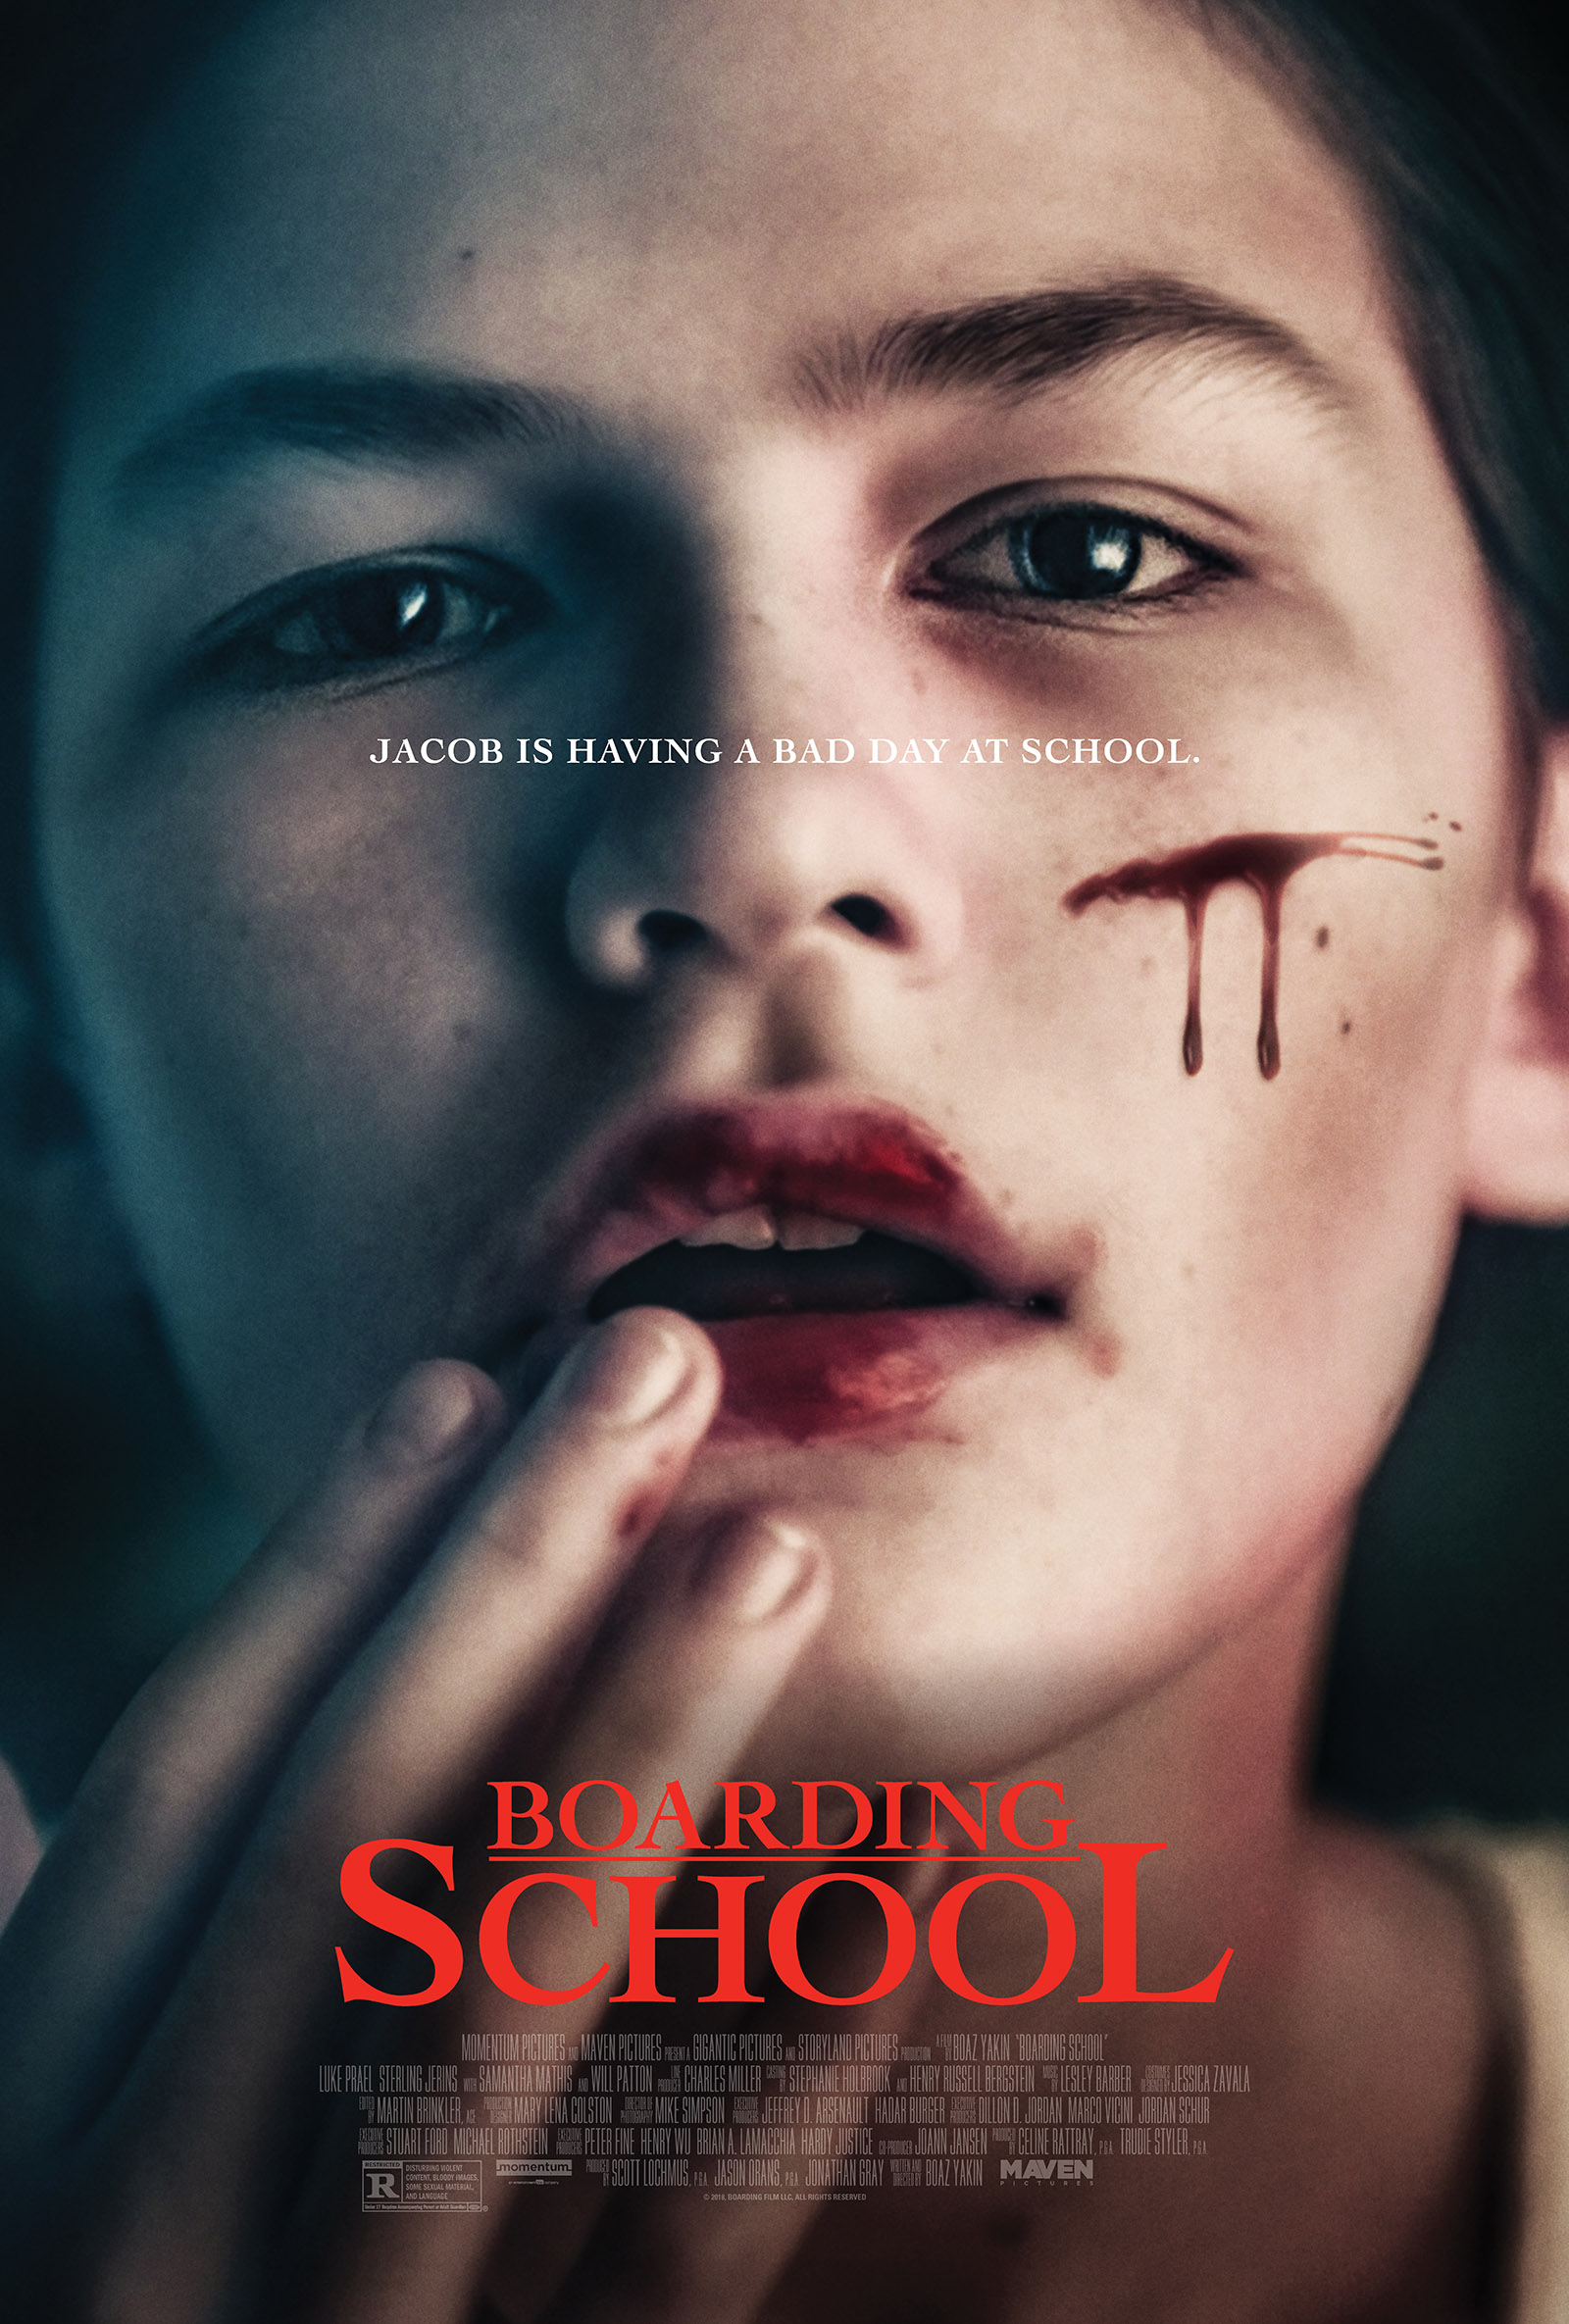 Movie poster with a pale young boy with blood on his lips and cheek, holding his fingers to his lips with his mouth open. The poster text reads'Jacob is having a bad day at school.', with the movie title appearing in red below his face.